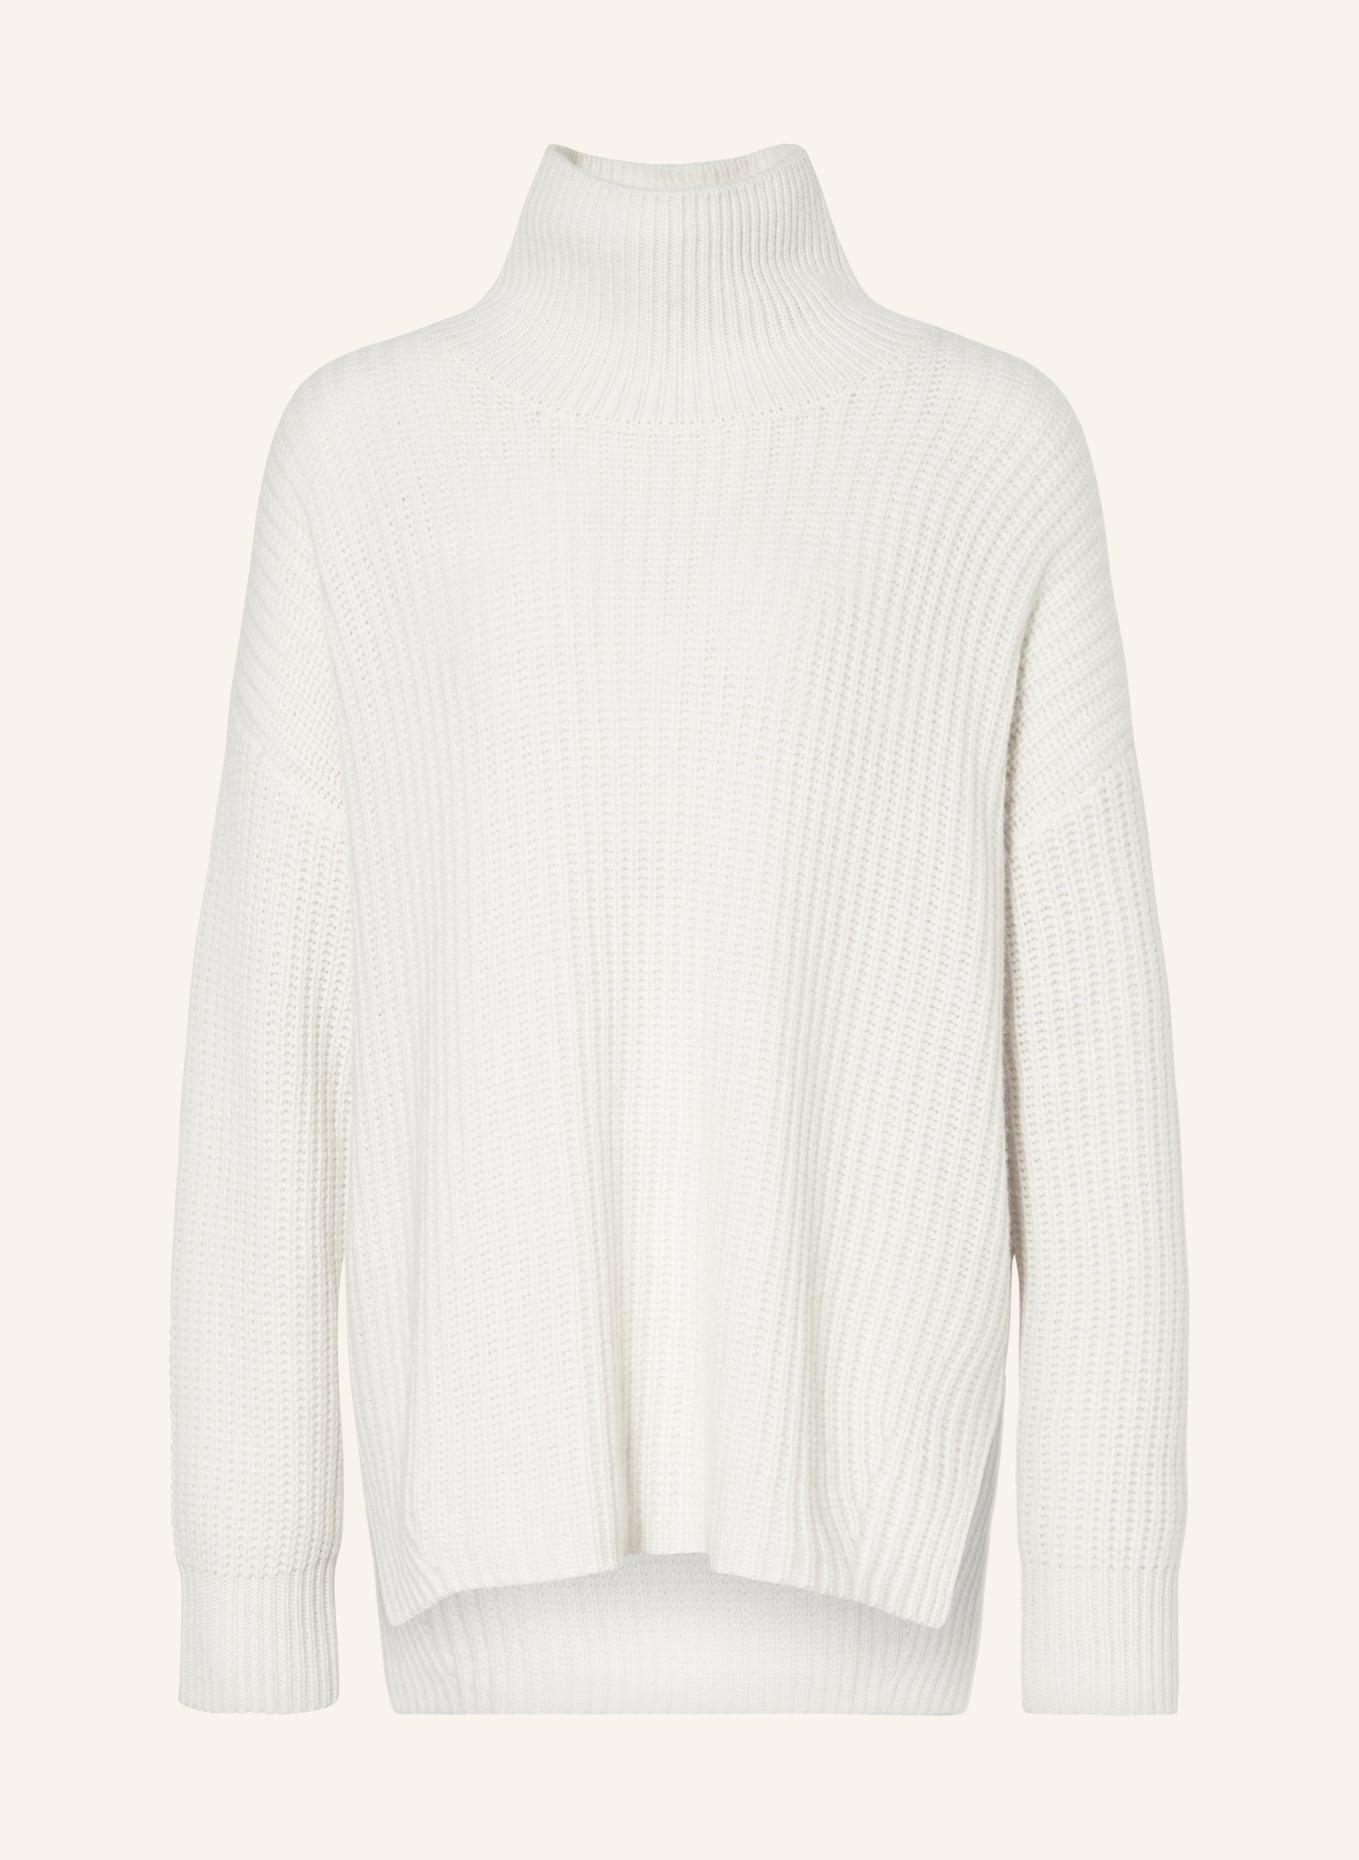 LISA YANG Cashmere-Pullover THERESE, Farbe: CREME (Bild 1)